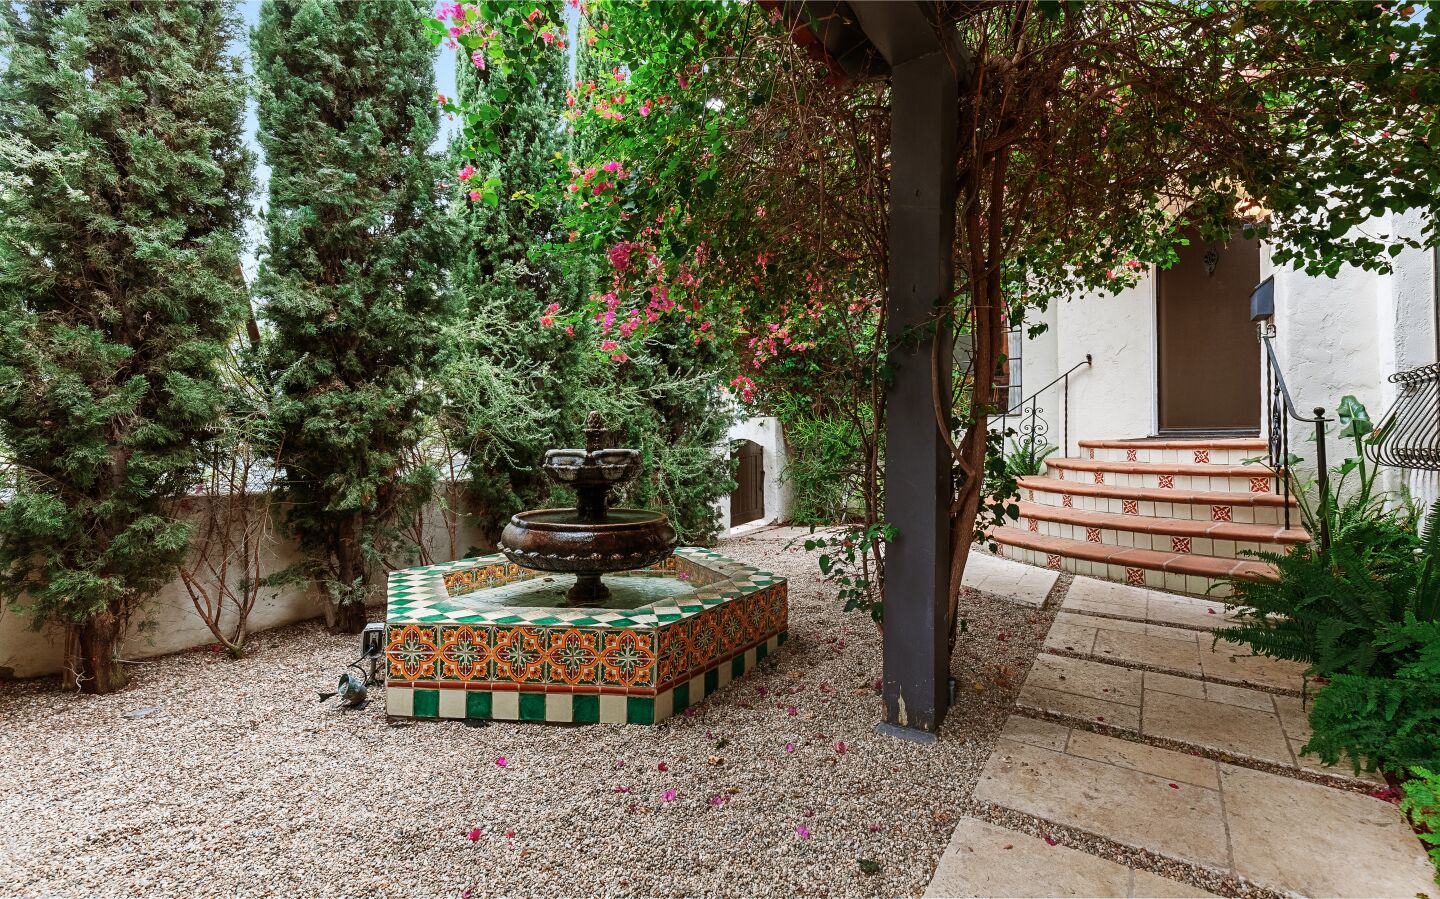 The courtyard with a fountain.